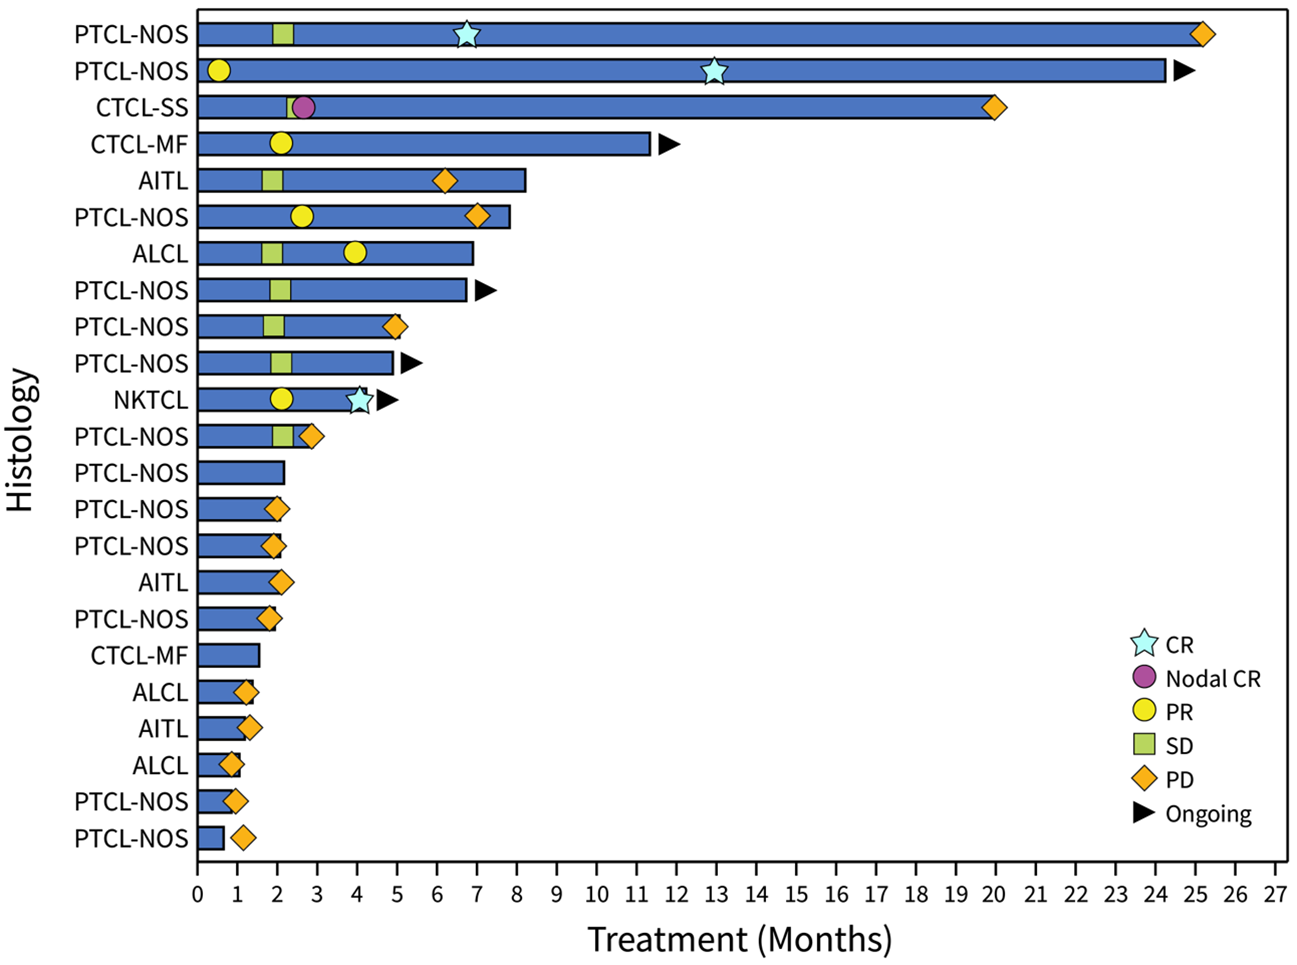 Swimmer Plot of Eligible Patient Population Demonstrating Response and Time on Therapy. Tumor histologies, as of January 22, 2024, are also shown indicating different types of T cell lymphoma. PTCL-NOS, peripheral T cell lymphoma not otherwise specified; CTCL, cutaneous T cell lymphoma of either Sezary or mycosis fungoides type; NKTCL, natural killer cell T cell lymphoma; ALCL, anaplastic large cell lymphoma; AITL,  angioimmunoblastic T cell lymphoma.